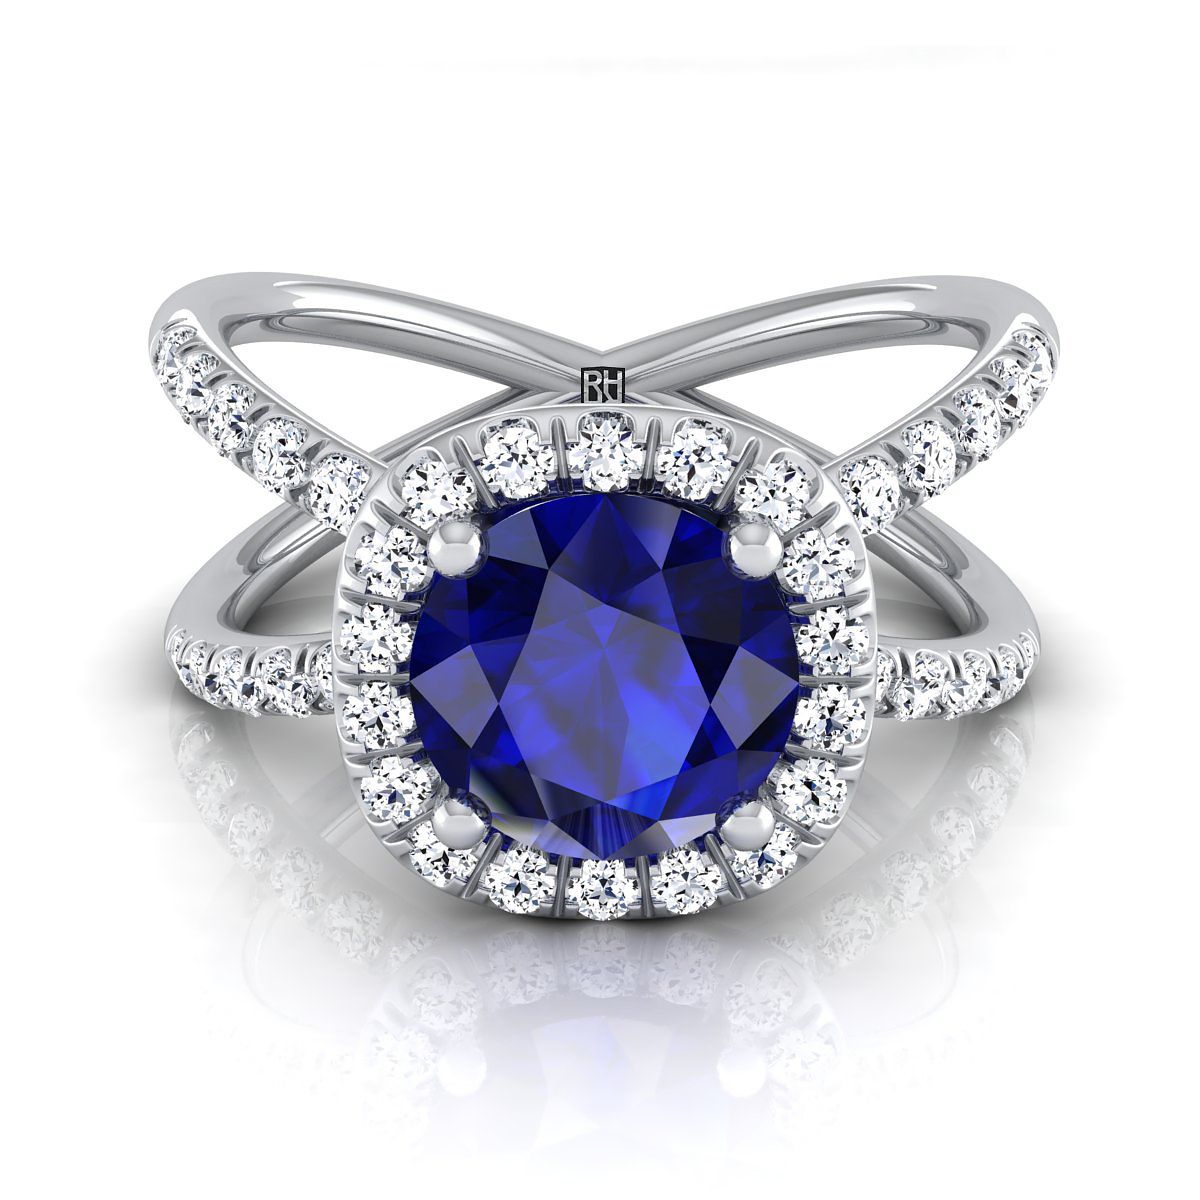 18K White Gold Round Brilliant Sapphire Open Criss Cross French Pave Diamond Engagement Ring -1/2ctw